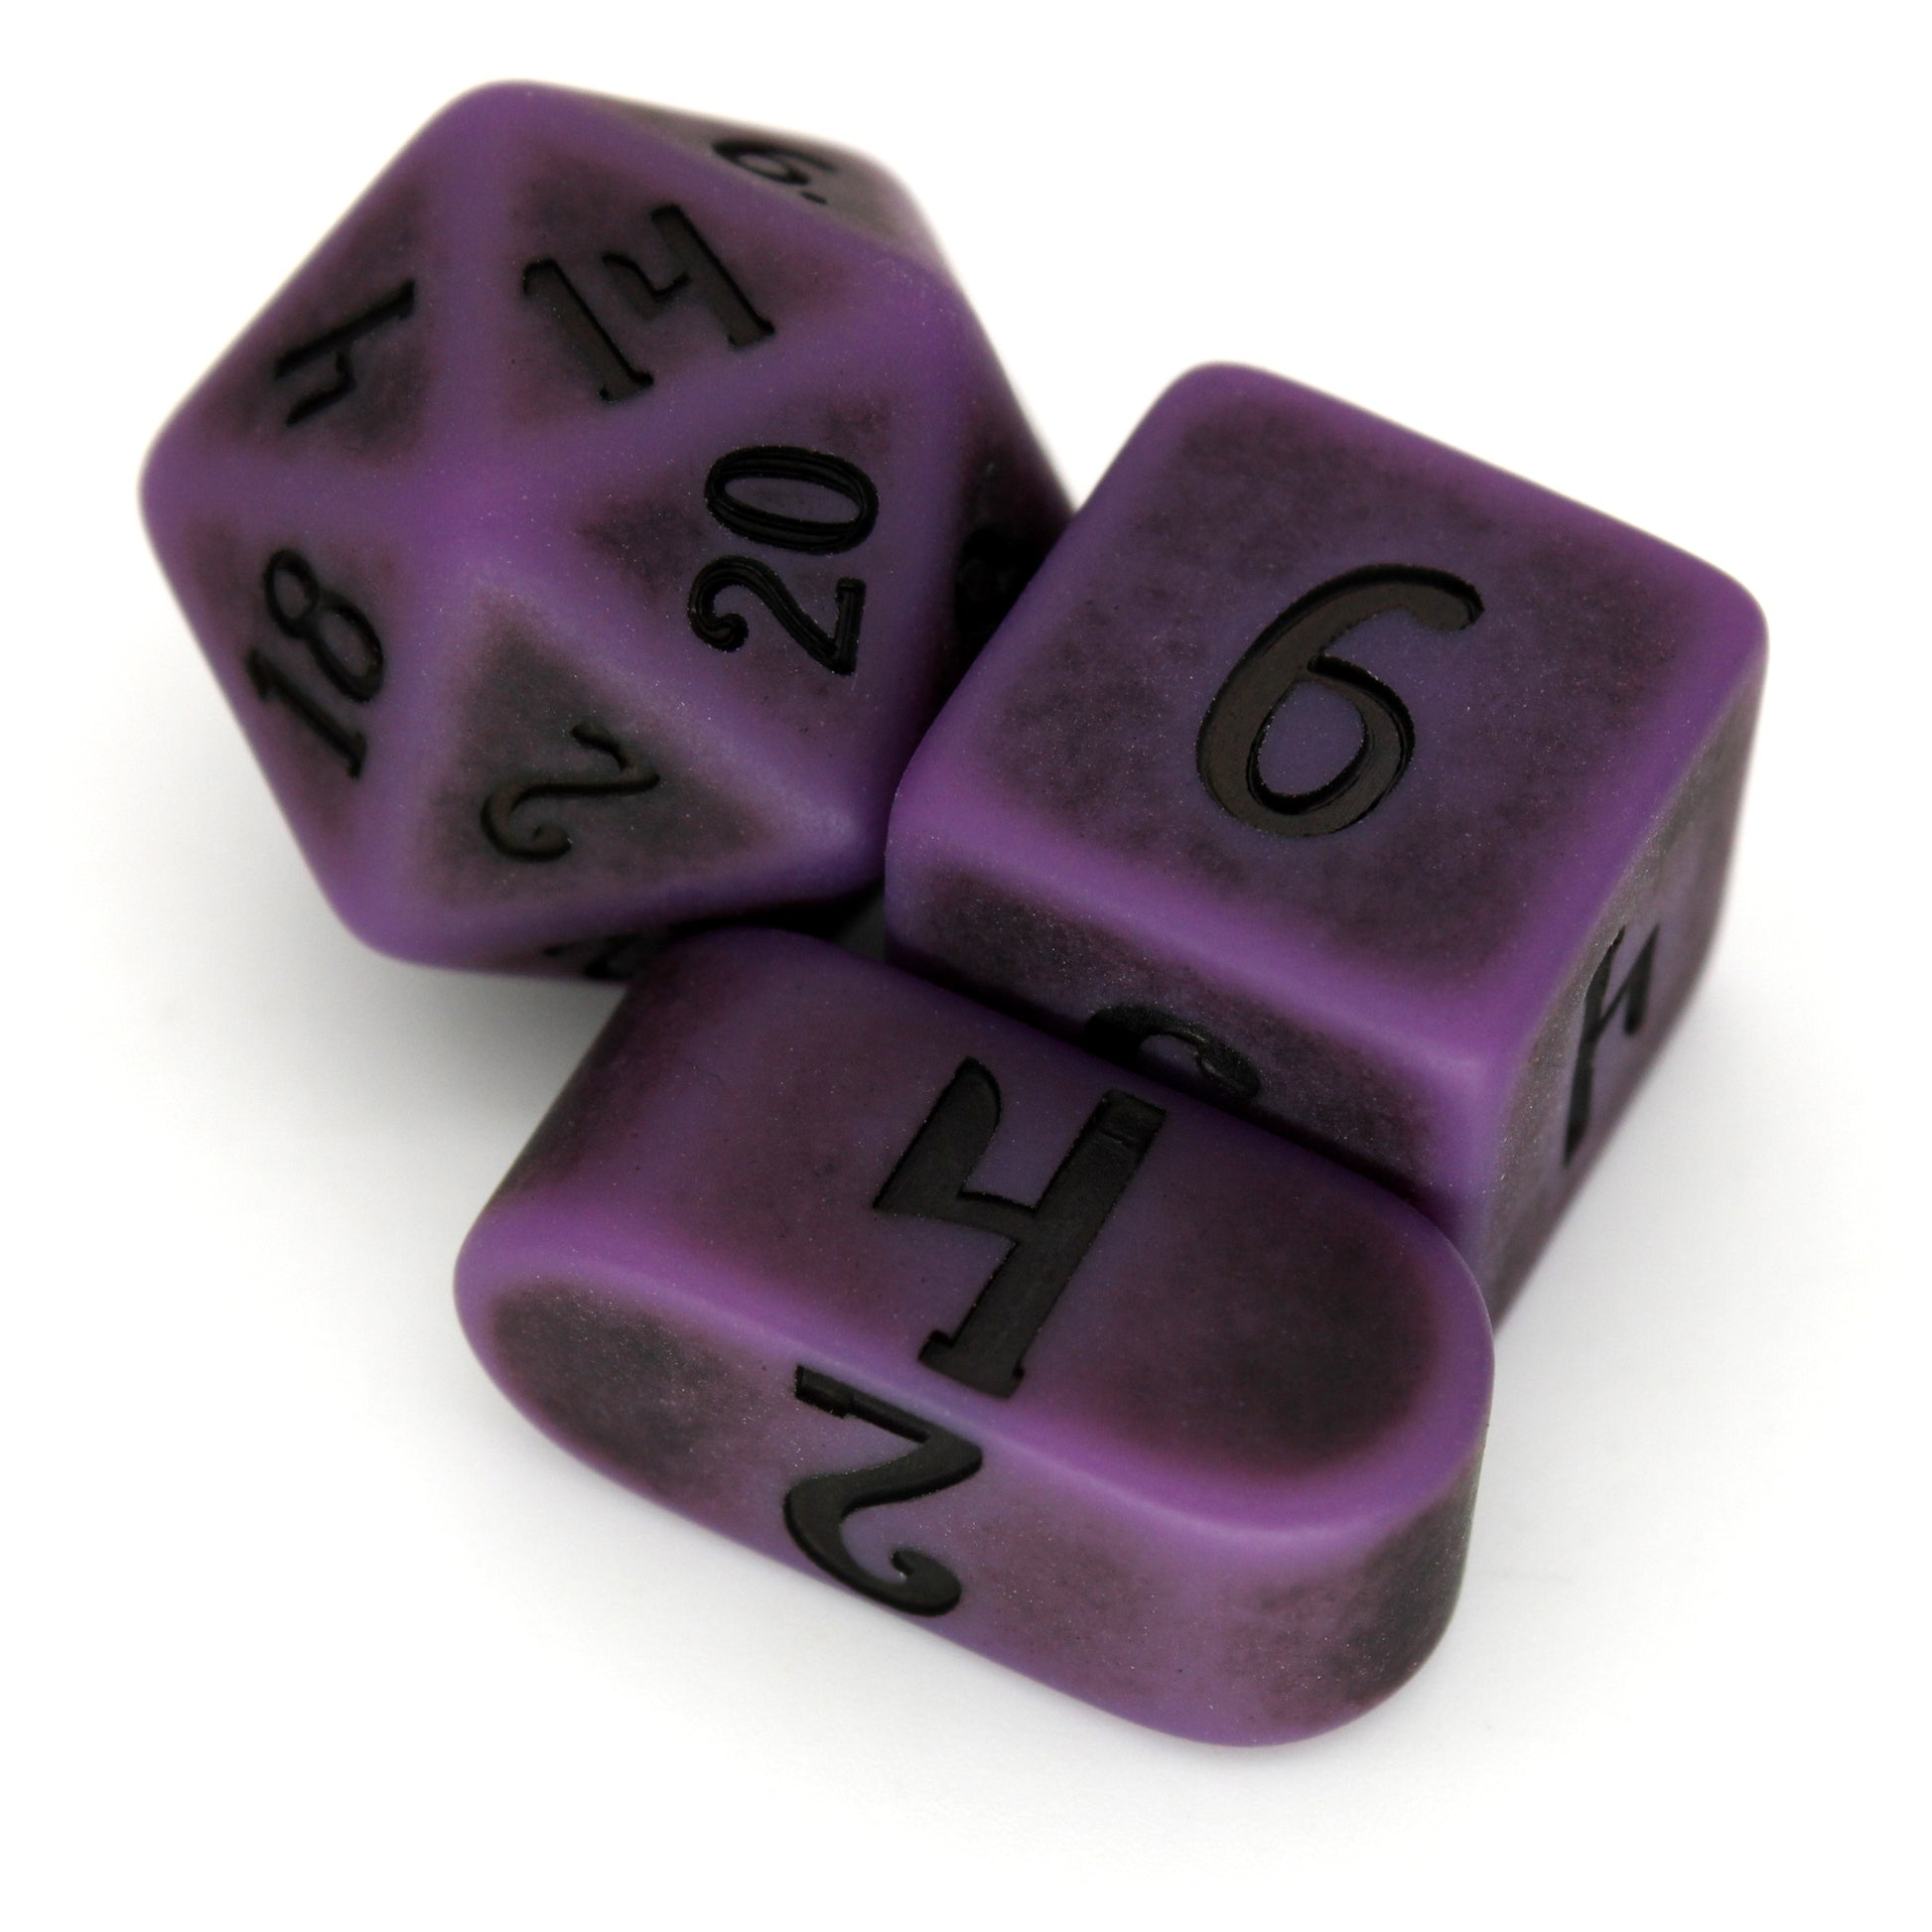 Worm Poison is a 10-piece set of wormy purple resin dice with a matte powder finish and black inking.